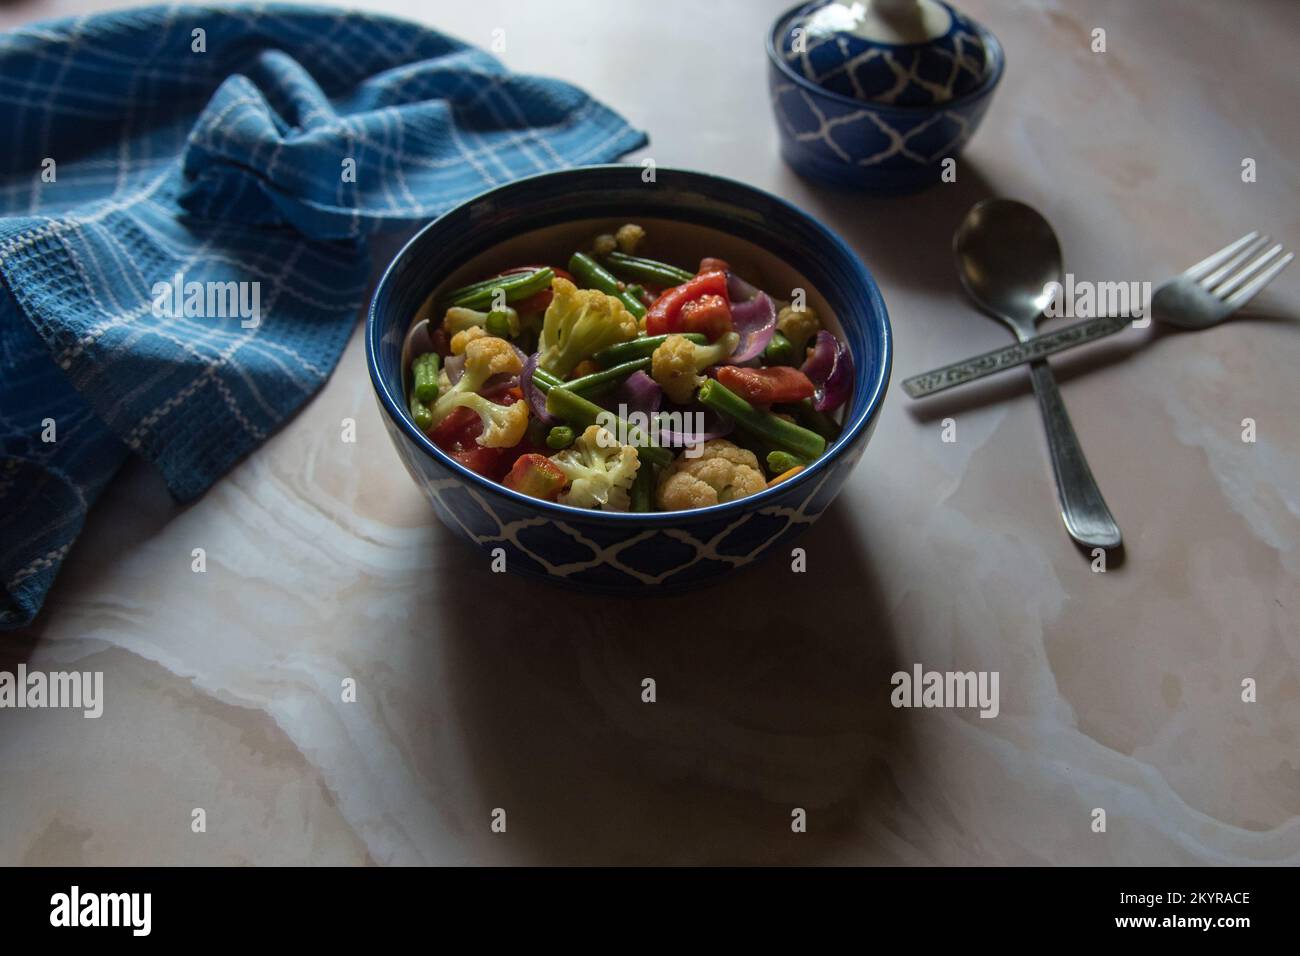 View from top of mixed vegetables curry served in a bowl. Stock Photo